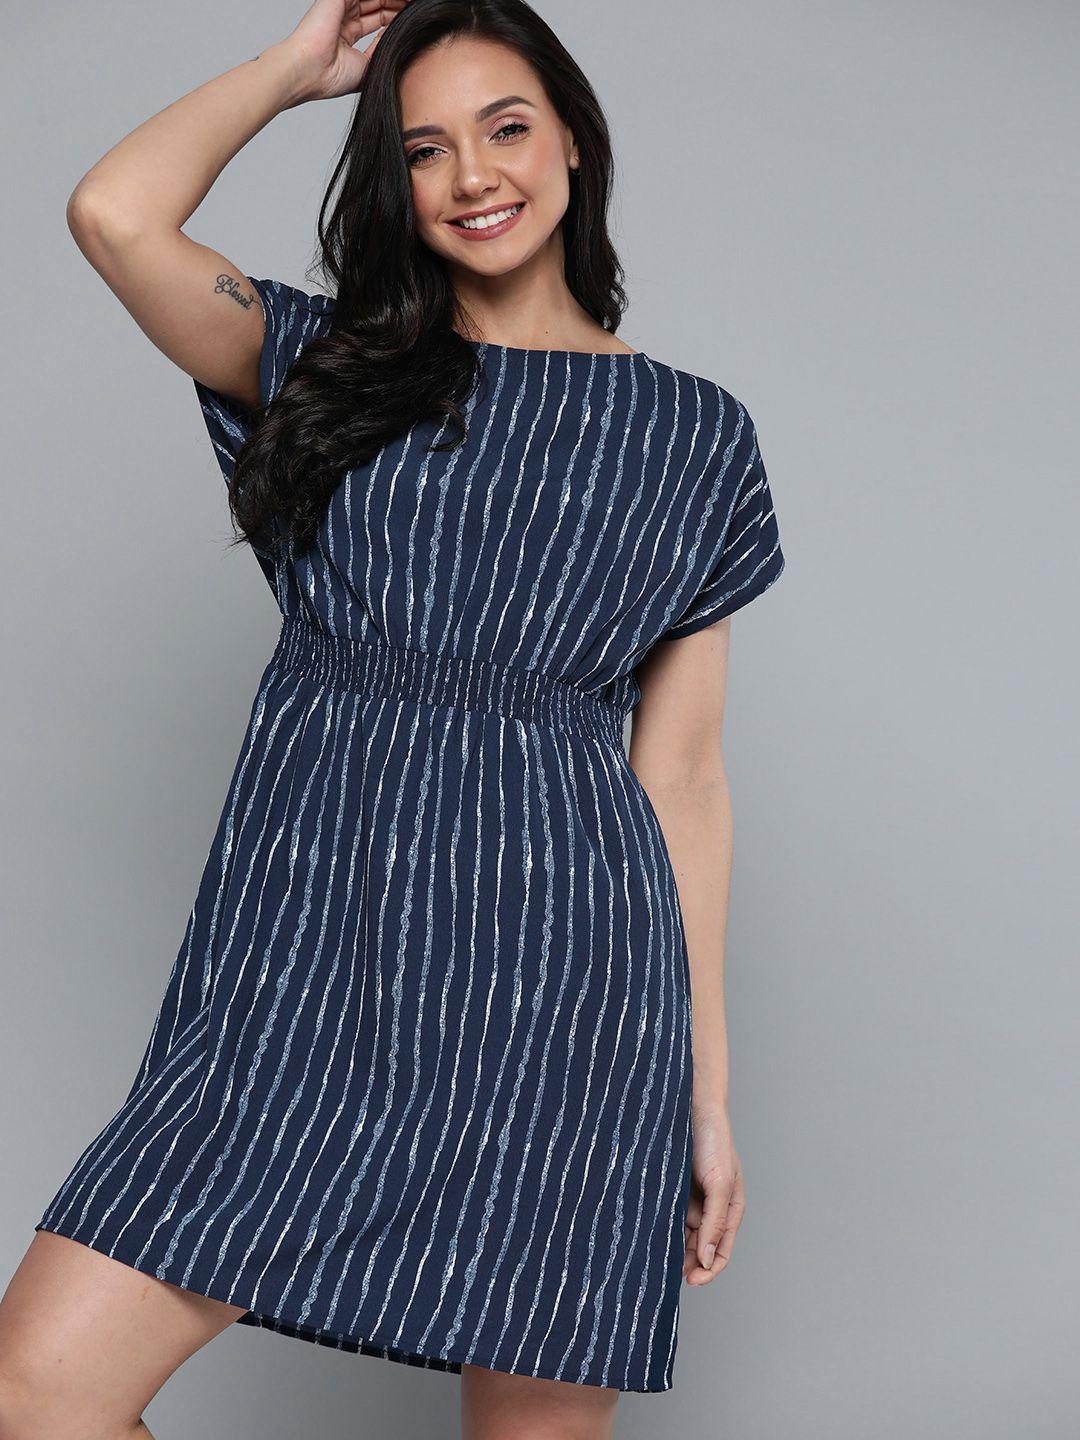 mast & harbour women navy blue & white striped a-line dress with smoking detail